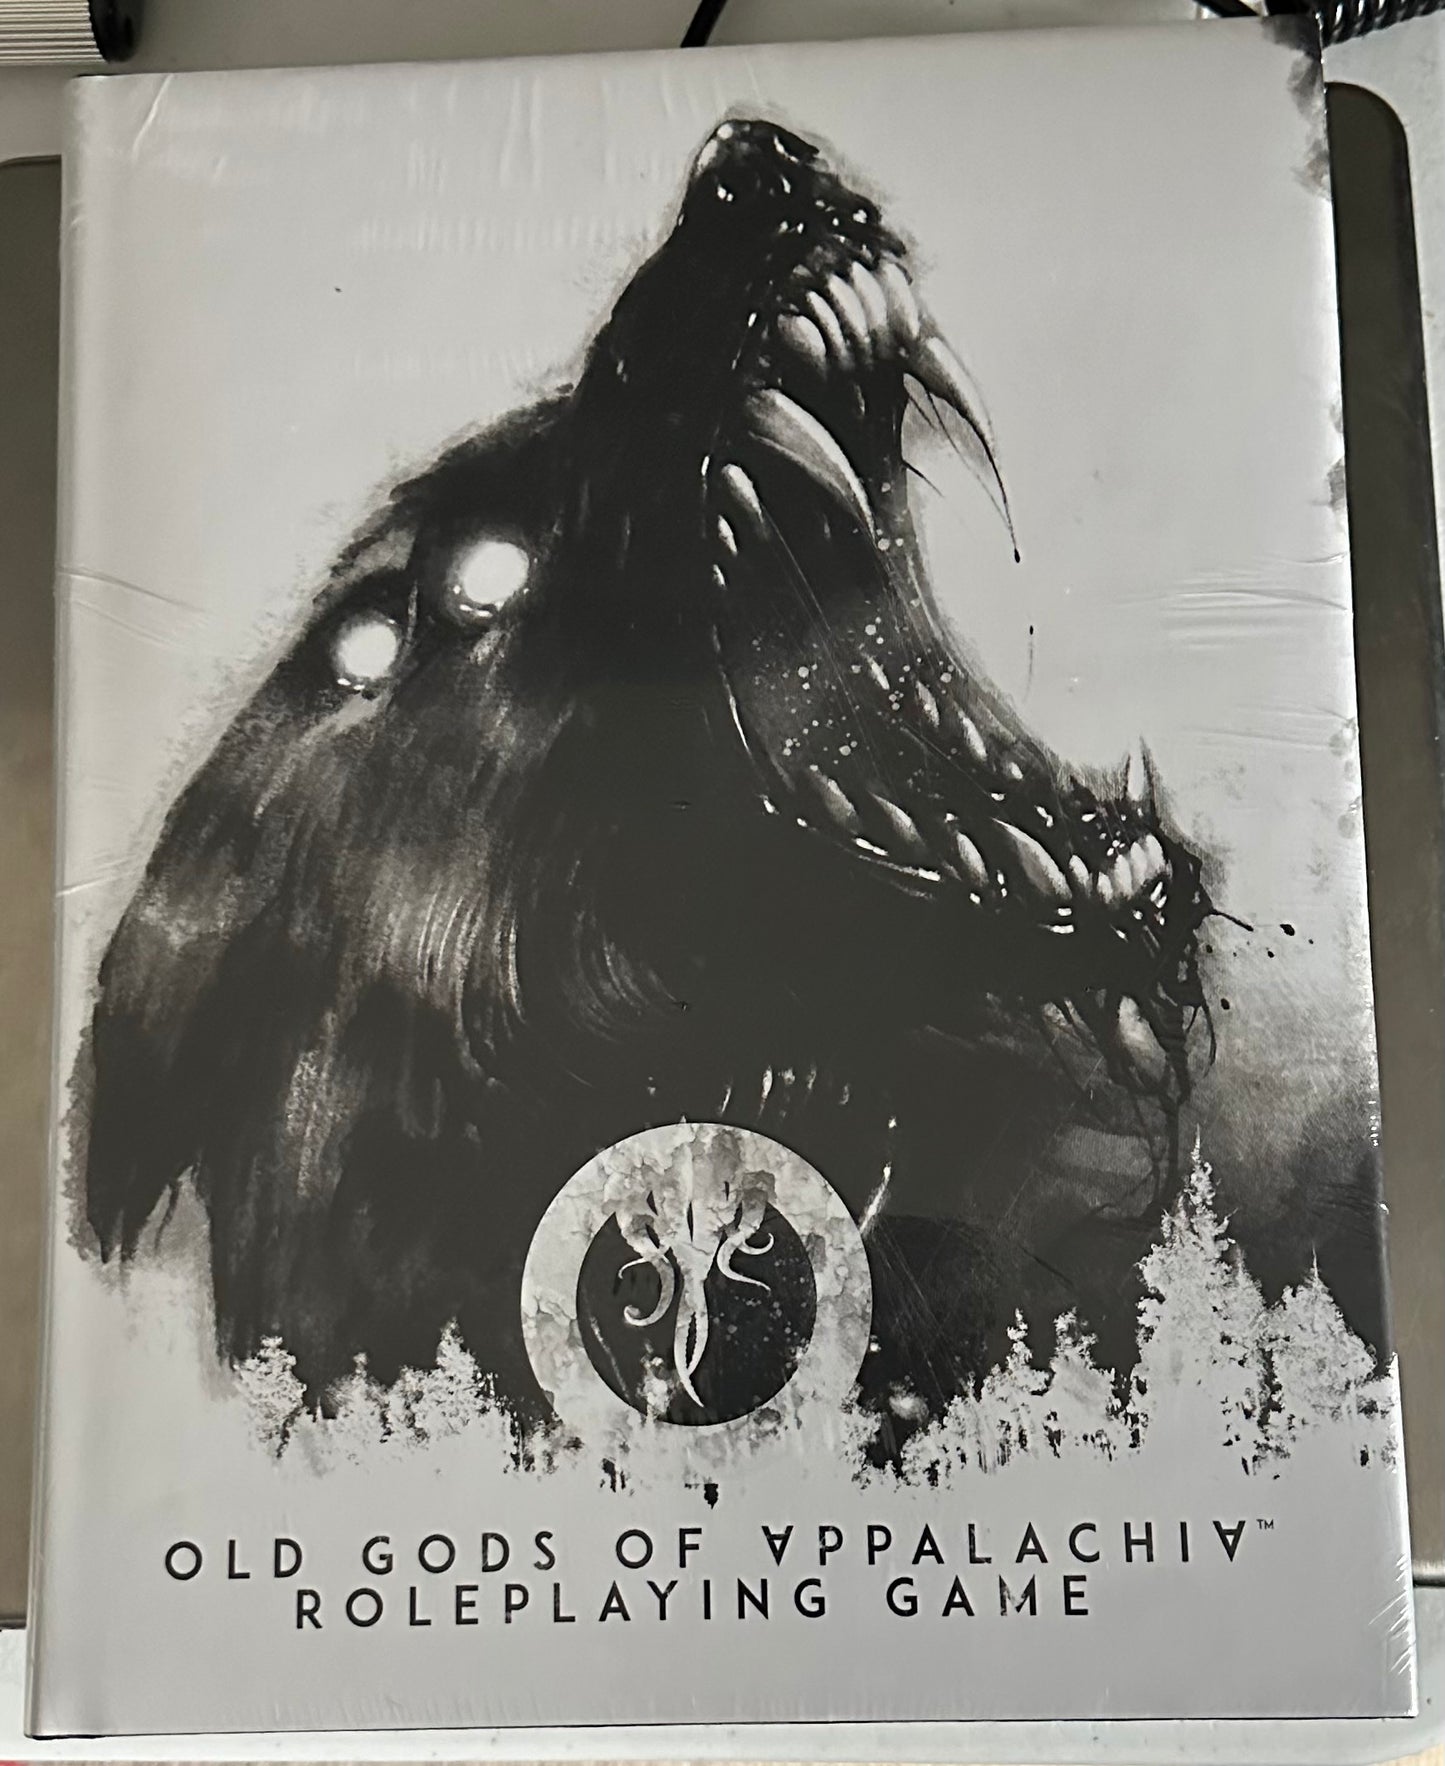 Old Gods of Appalachia RPG Deluxe Rulebook Hardcover by Monte Cook Games